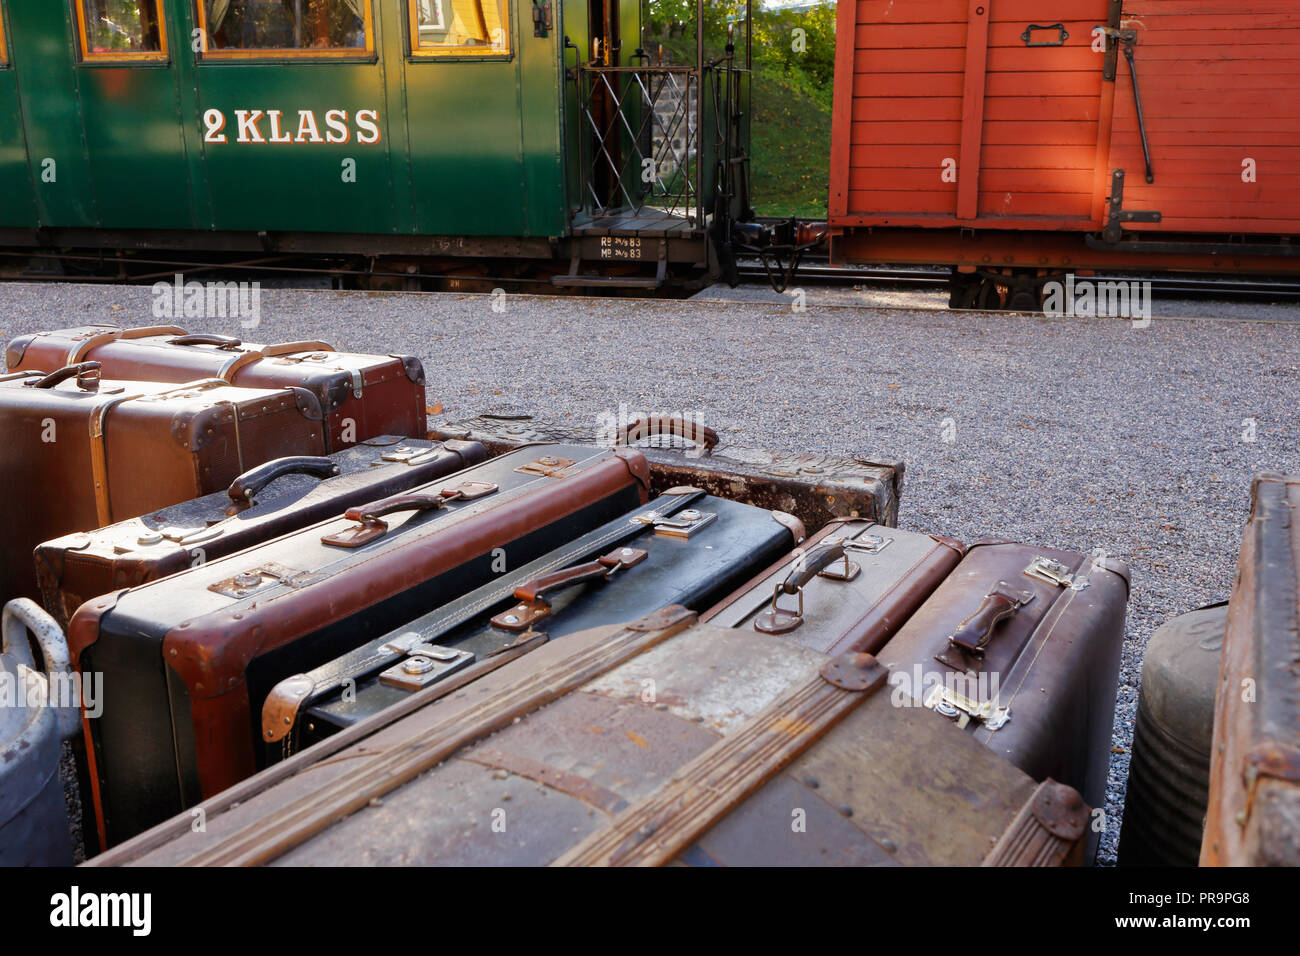 Luggage with suitcases in front of an old train with a wagon and a green second-class passanger wagon. Stock Photo